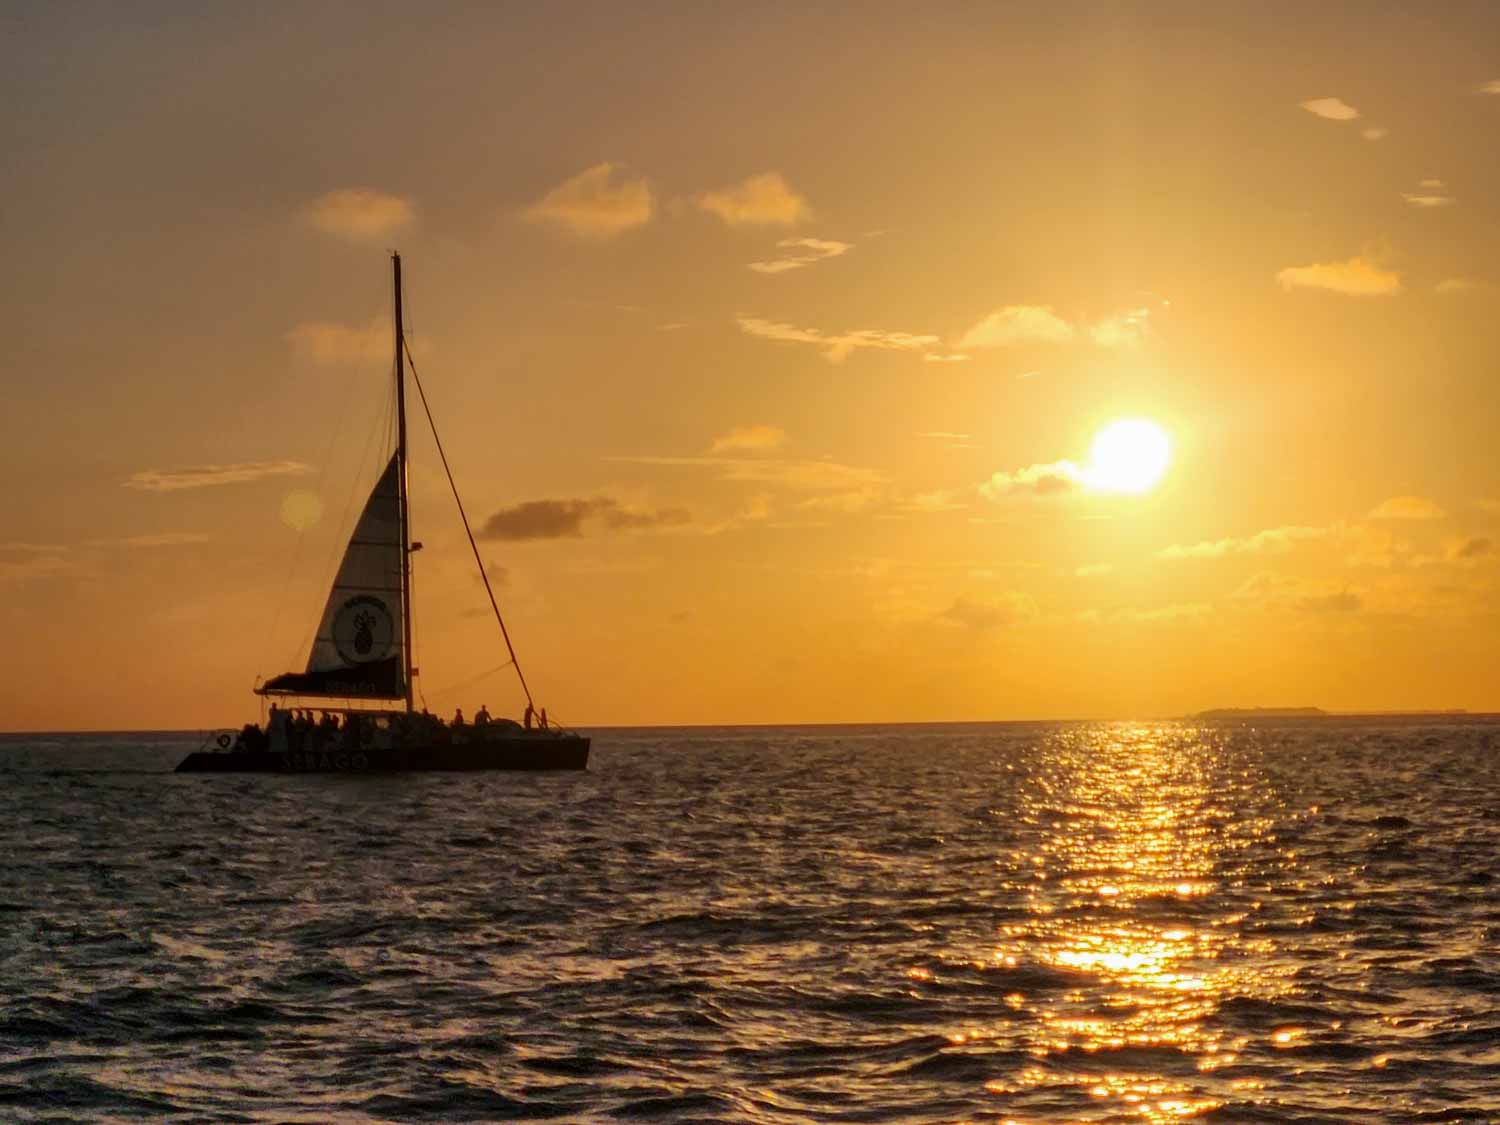 View of a sailing ship silhouetted against the horizon just before sunset - a sunset cruise is one of the best things to do in Key West with older kids during a Florida Keys road trip